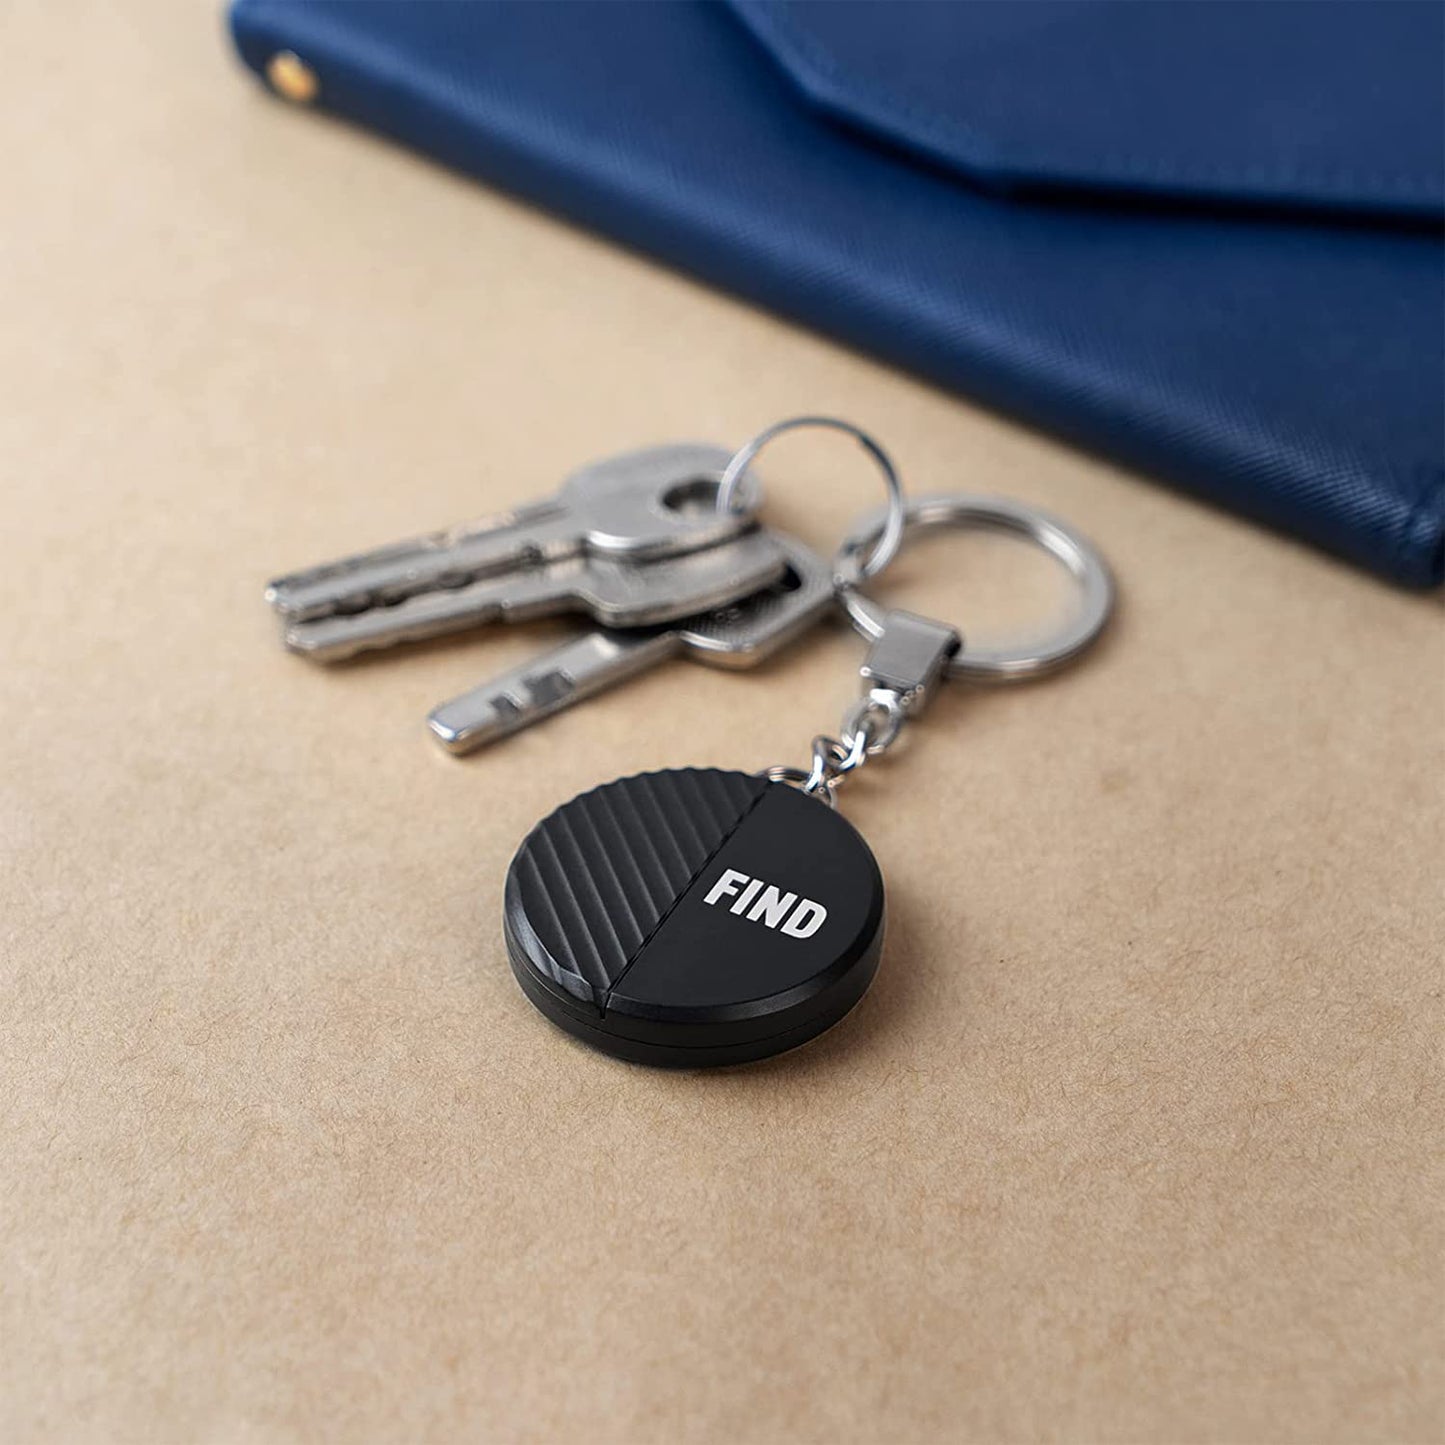 Nutale Key Finder, Bluetooth Tracker Item Locator with Key Chain for Keys Pet Wallets or Backpacks and Tablets, Batteries Include (F9XT 1 Pack)